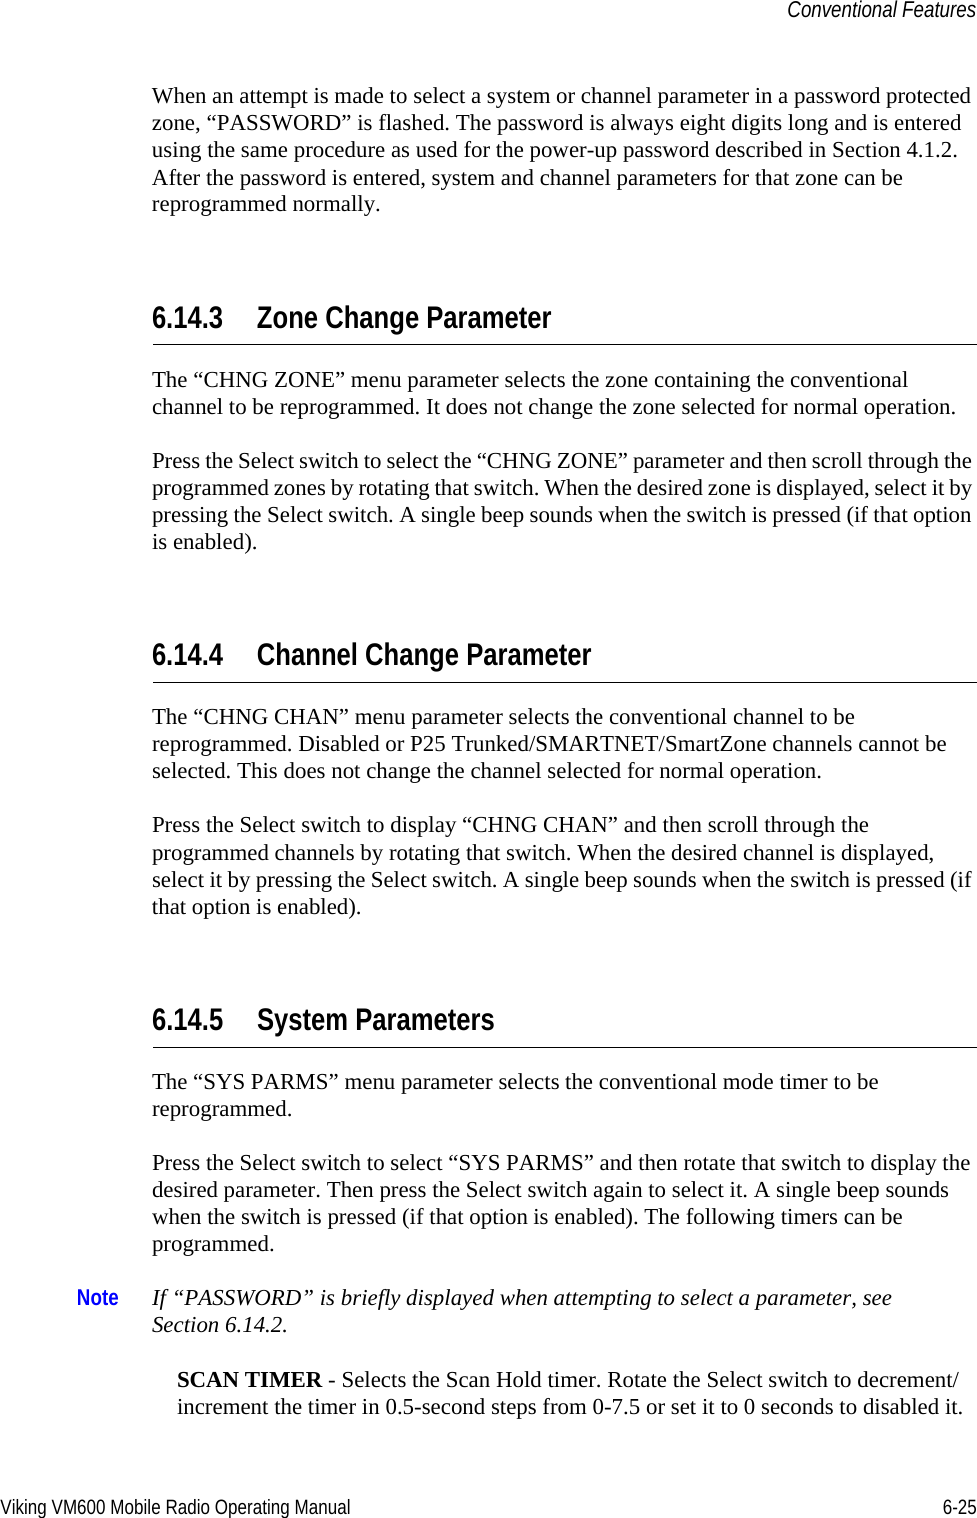 Viking VM600 Mobile Radio Operating Manual 6-25Conventional FeaturesWhen an attempt is made to select a system or channel parameter in a password protected zone, “PASSWORD” is flashed. The password is always eight digits long and is entered using the same procedure as used for the power-up password described in Section 4.1.2. After the password is entered, system and channel parameters for that zone can be reprogrammed normally.6.14.3 Zone Change ParameterThe “CHNG ZONE” menu parameter selects the zone containing the conventional channel to be reprogrammed. It does not change the zone selected for normal operation.Press the Select switch to select the “CHNG ZONE” parameter and then scroll through the programmed zones by rotating that switch. When the desired zone is displayed, select it by pressing the Select switch. A single beep sounds when the switch is pressed (if that option is enabled). 6.14.4 Channel Change ParameterThe “CHNG CHAN” menu parameter selects the conventional channel to be reprogrammed. Disabled or P25 Trunked/SMARTNET/SmartZone channels cannot be selected. This does not change the channel selected for normal operation.Press the Select switch to display “CHNG CHAN” and then scroll through the programmed channels by rotating that switch. When the desired channel is displayed, select it by pressing the Select switch. A single beep sounds when the switch is pressed (if that option is enabled). 6.14.5 System ParametersThe “SYS PARMS” menu parameter selects the conventional mode timer to be reprogrammed.Press the Select switch to select “SYS PARMS” and then rotate that switch to display the desired parameter. Then press the Select switch again to select it. A single beep sounds when the switch is pressed (if that option is enabled). The following timers can be programmed.Note If “PASSWORD” is briefly displayed when attempting to select a parameter, see Section 6.14.2.SCAN TIMER - Selects the Scan Hold timer. Rotate the Select switch to decrement/increment the timer in 0.5-second steps from 0-7.5 or set it to 0 seconds to disabled it. Draft 4/29/2014